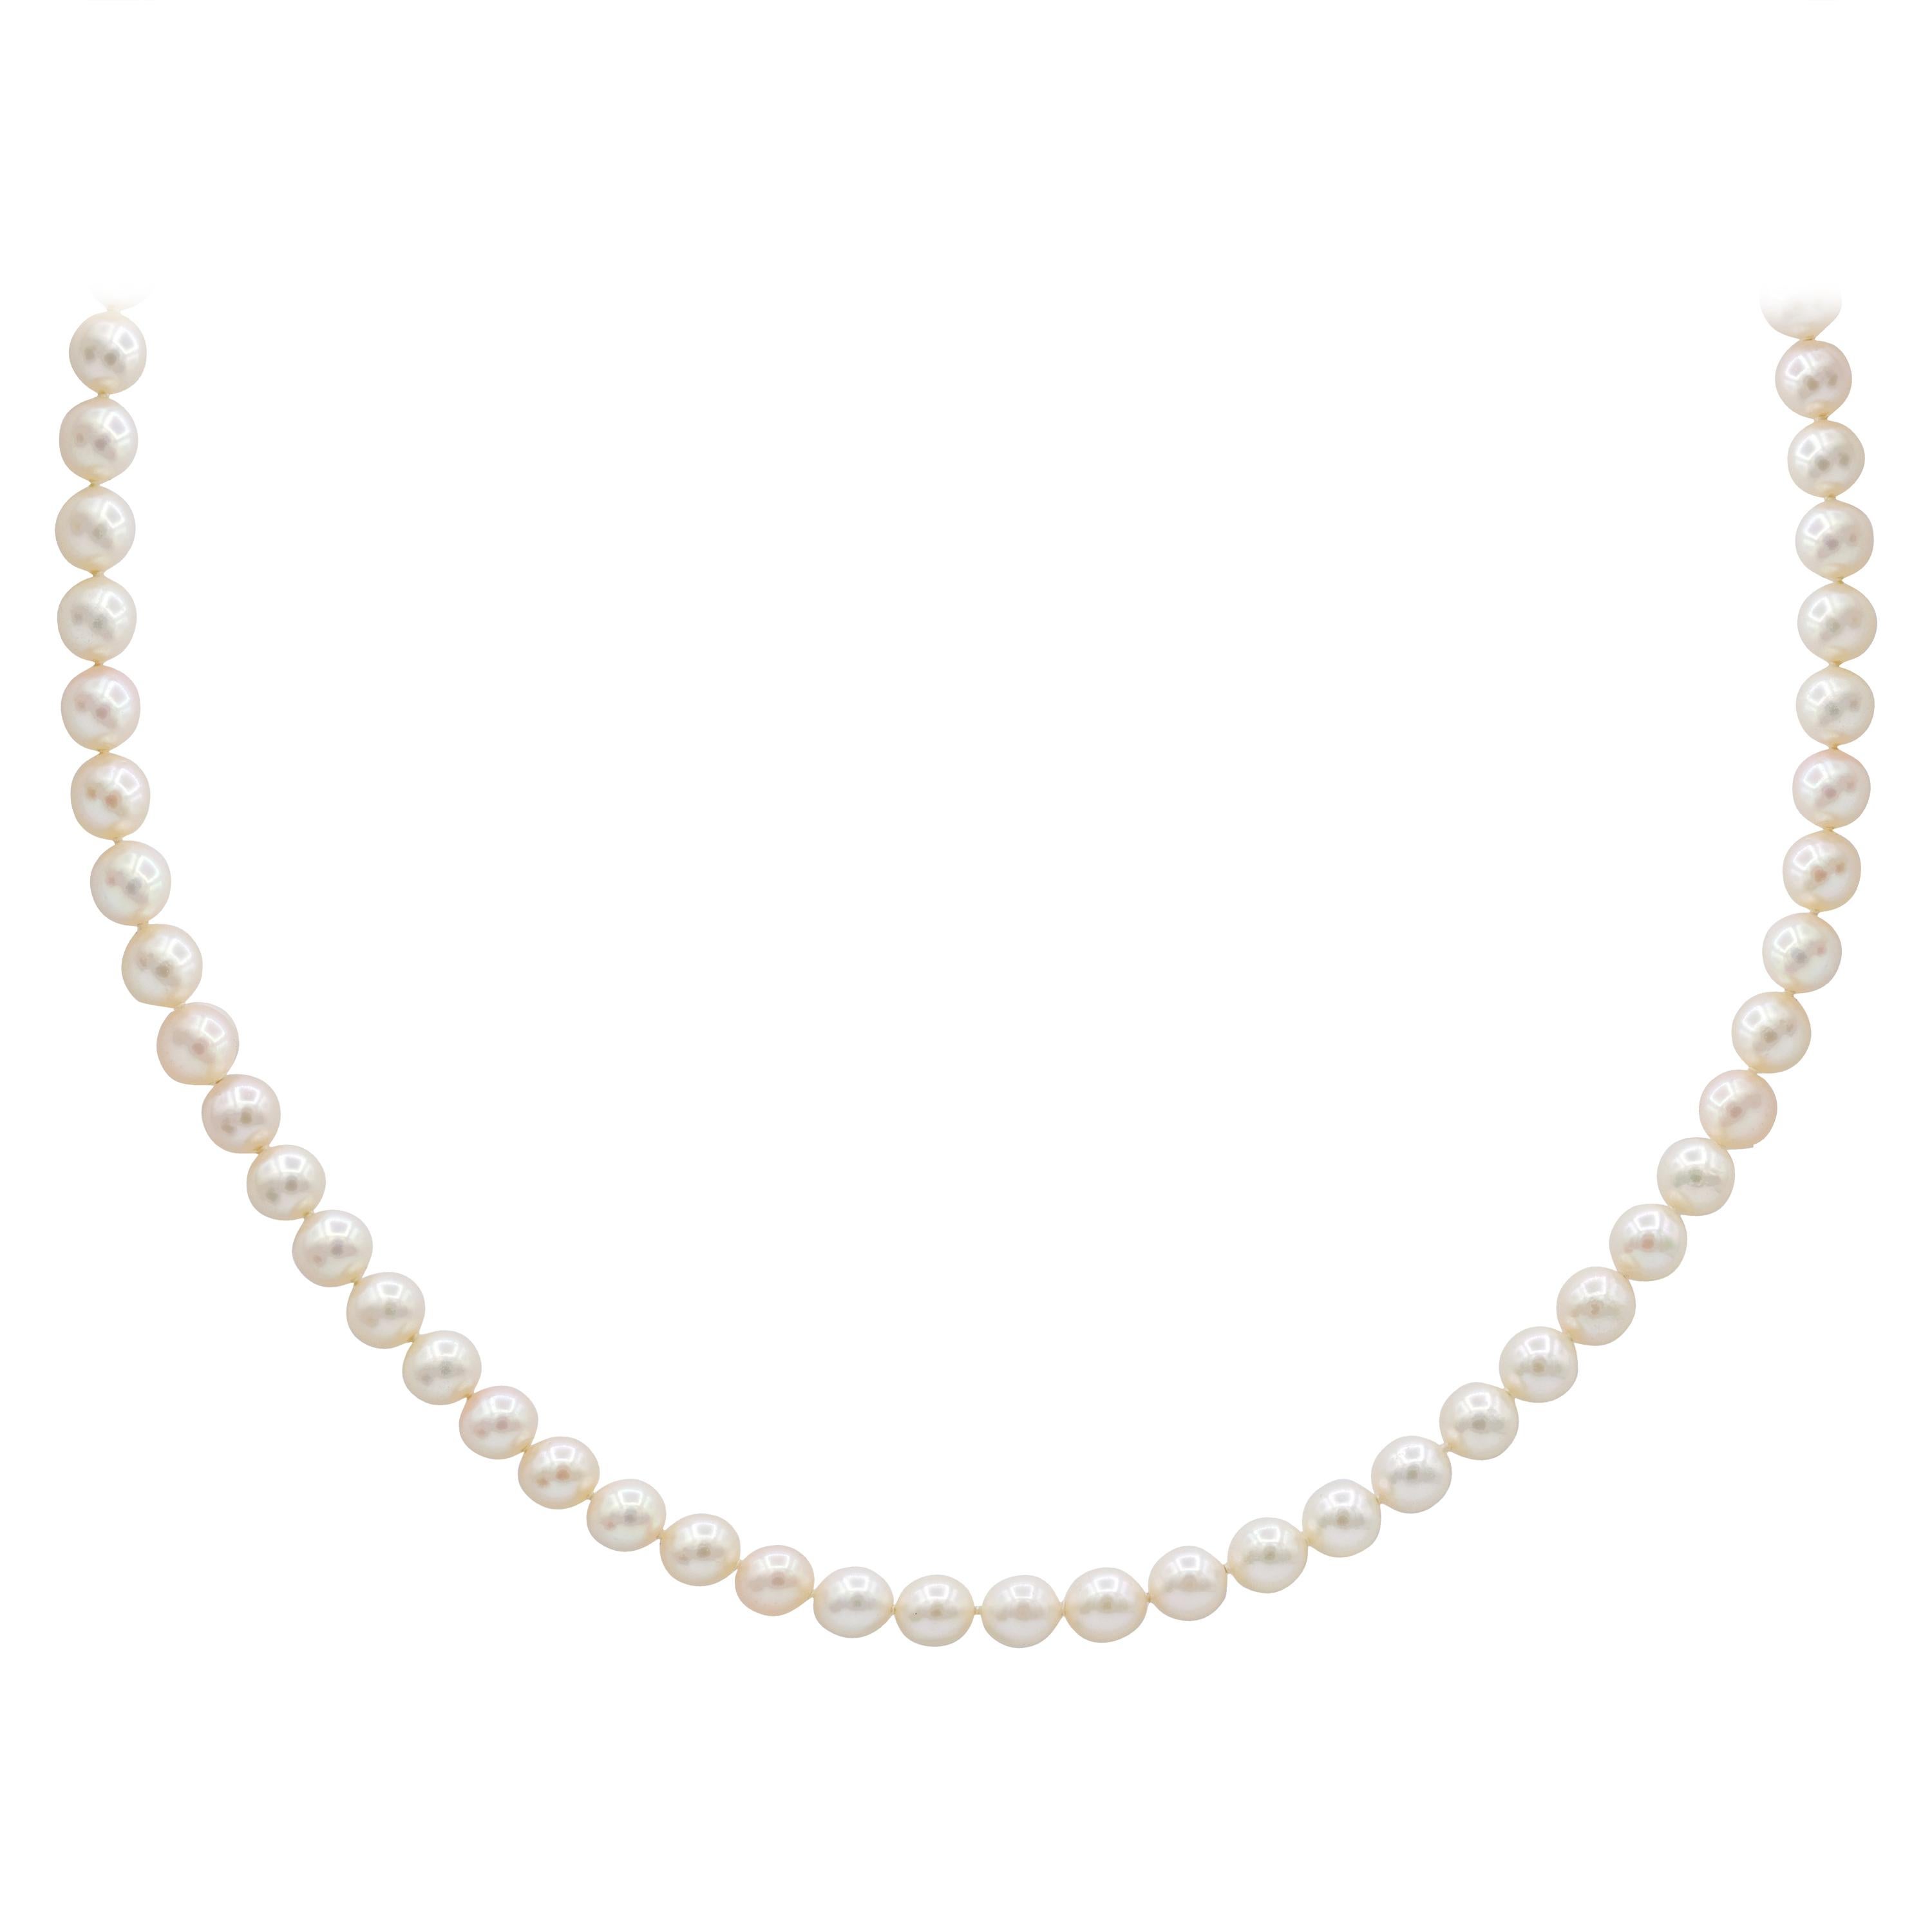 White Pearls Necklace with a Clasp, Features Round Diamonds